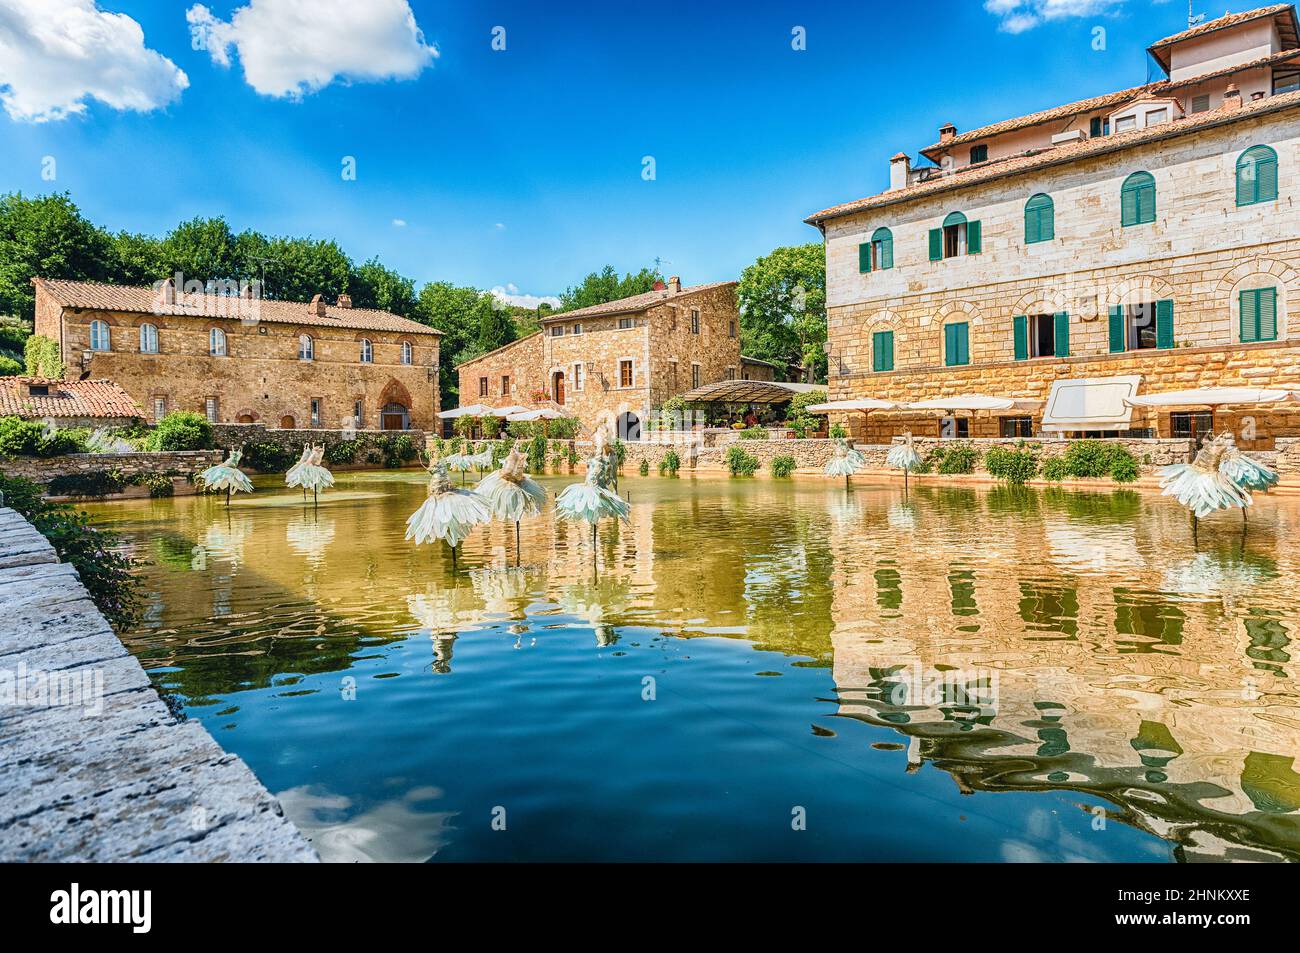 Medieval thermal baths in the town of Bagno Vignoni, Italy Stock Photo